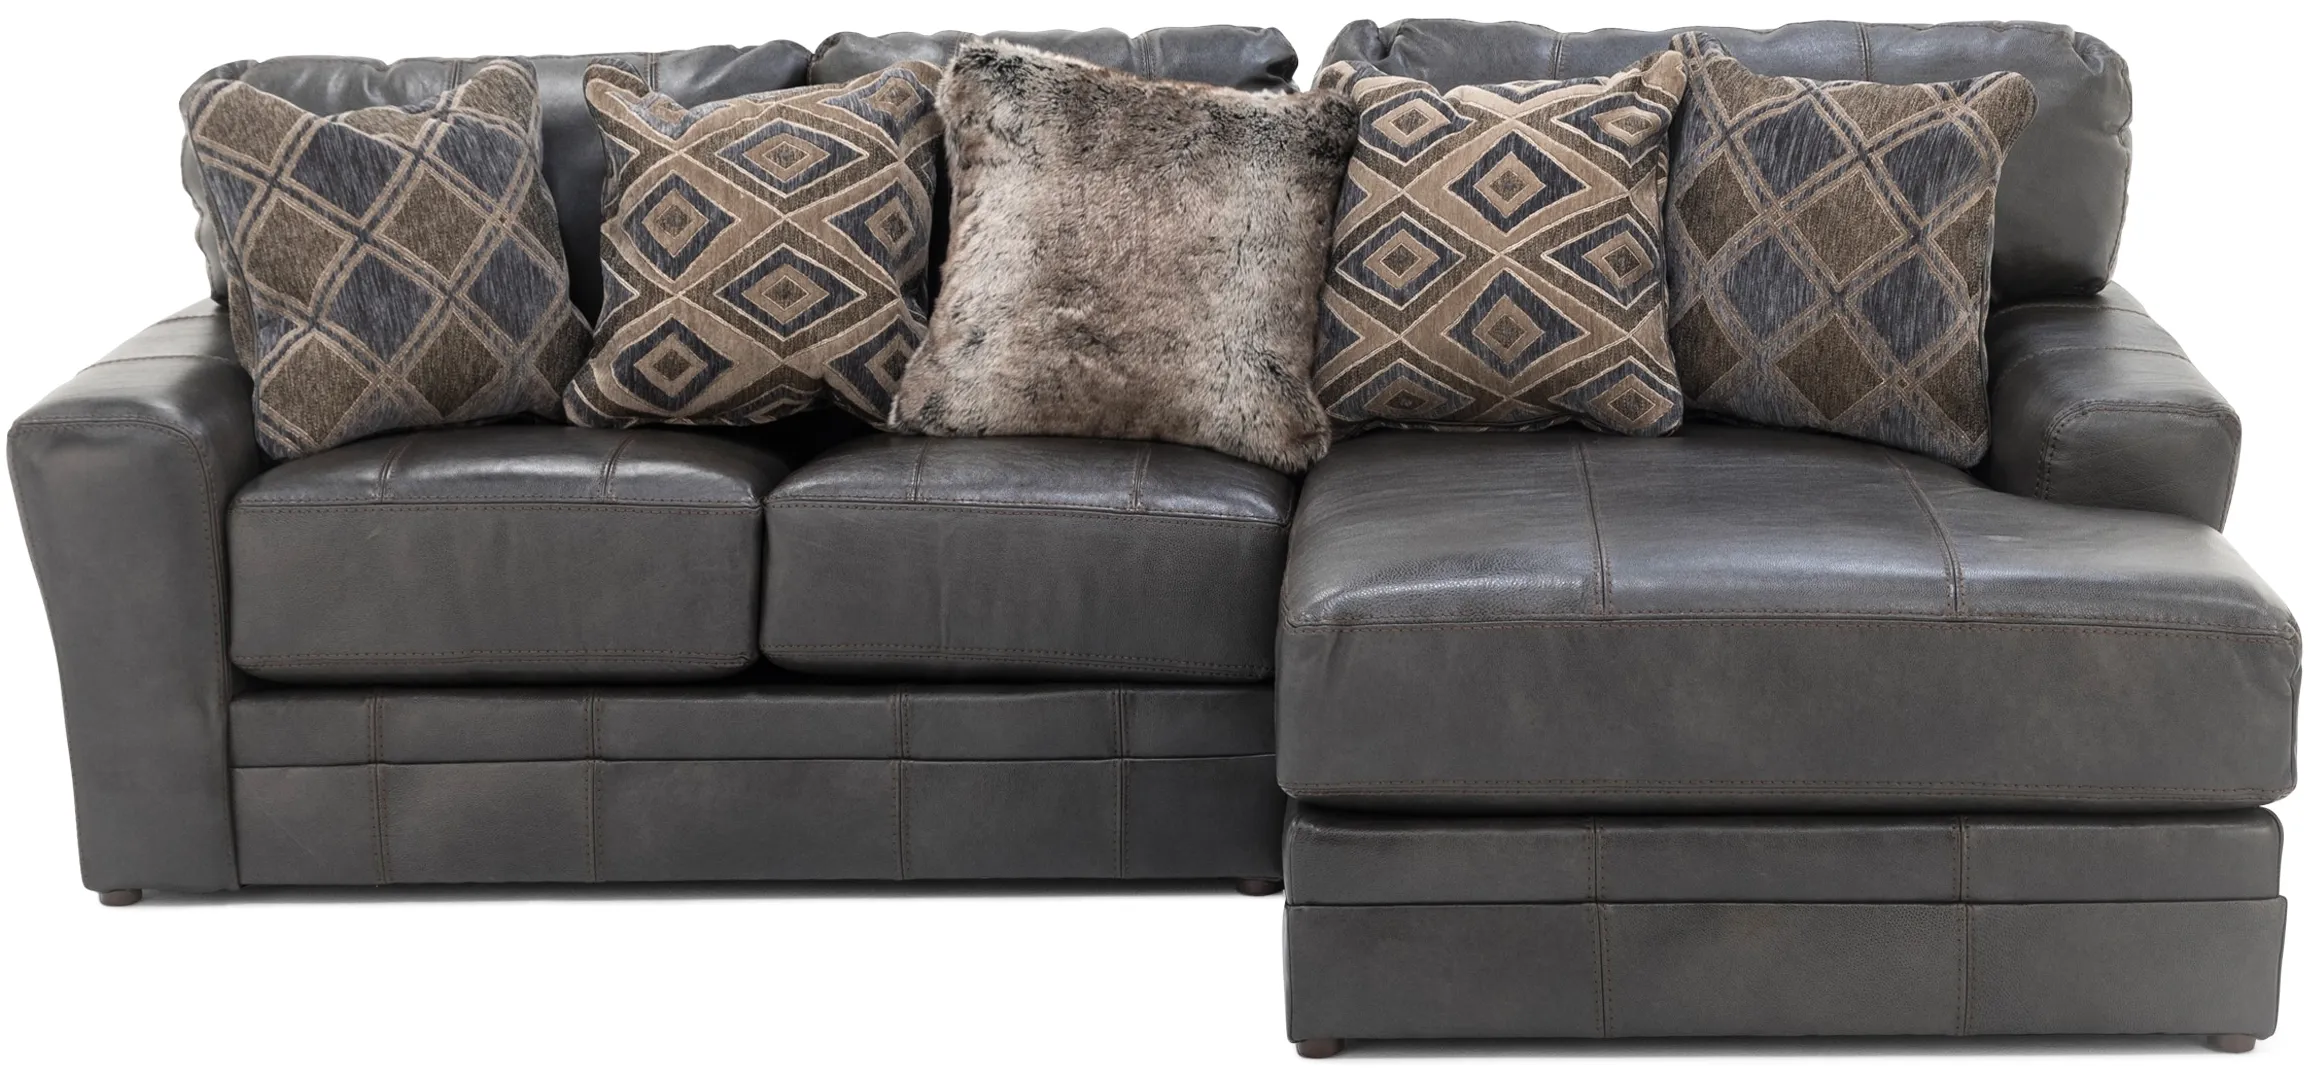 Camden 2-Pc. Leather Sectional with Right Arm Facing Chaise in Steel